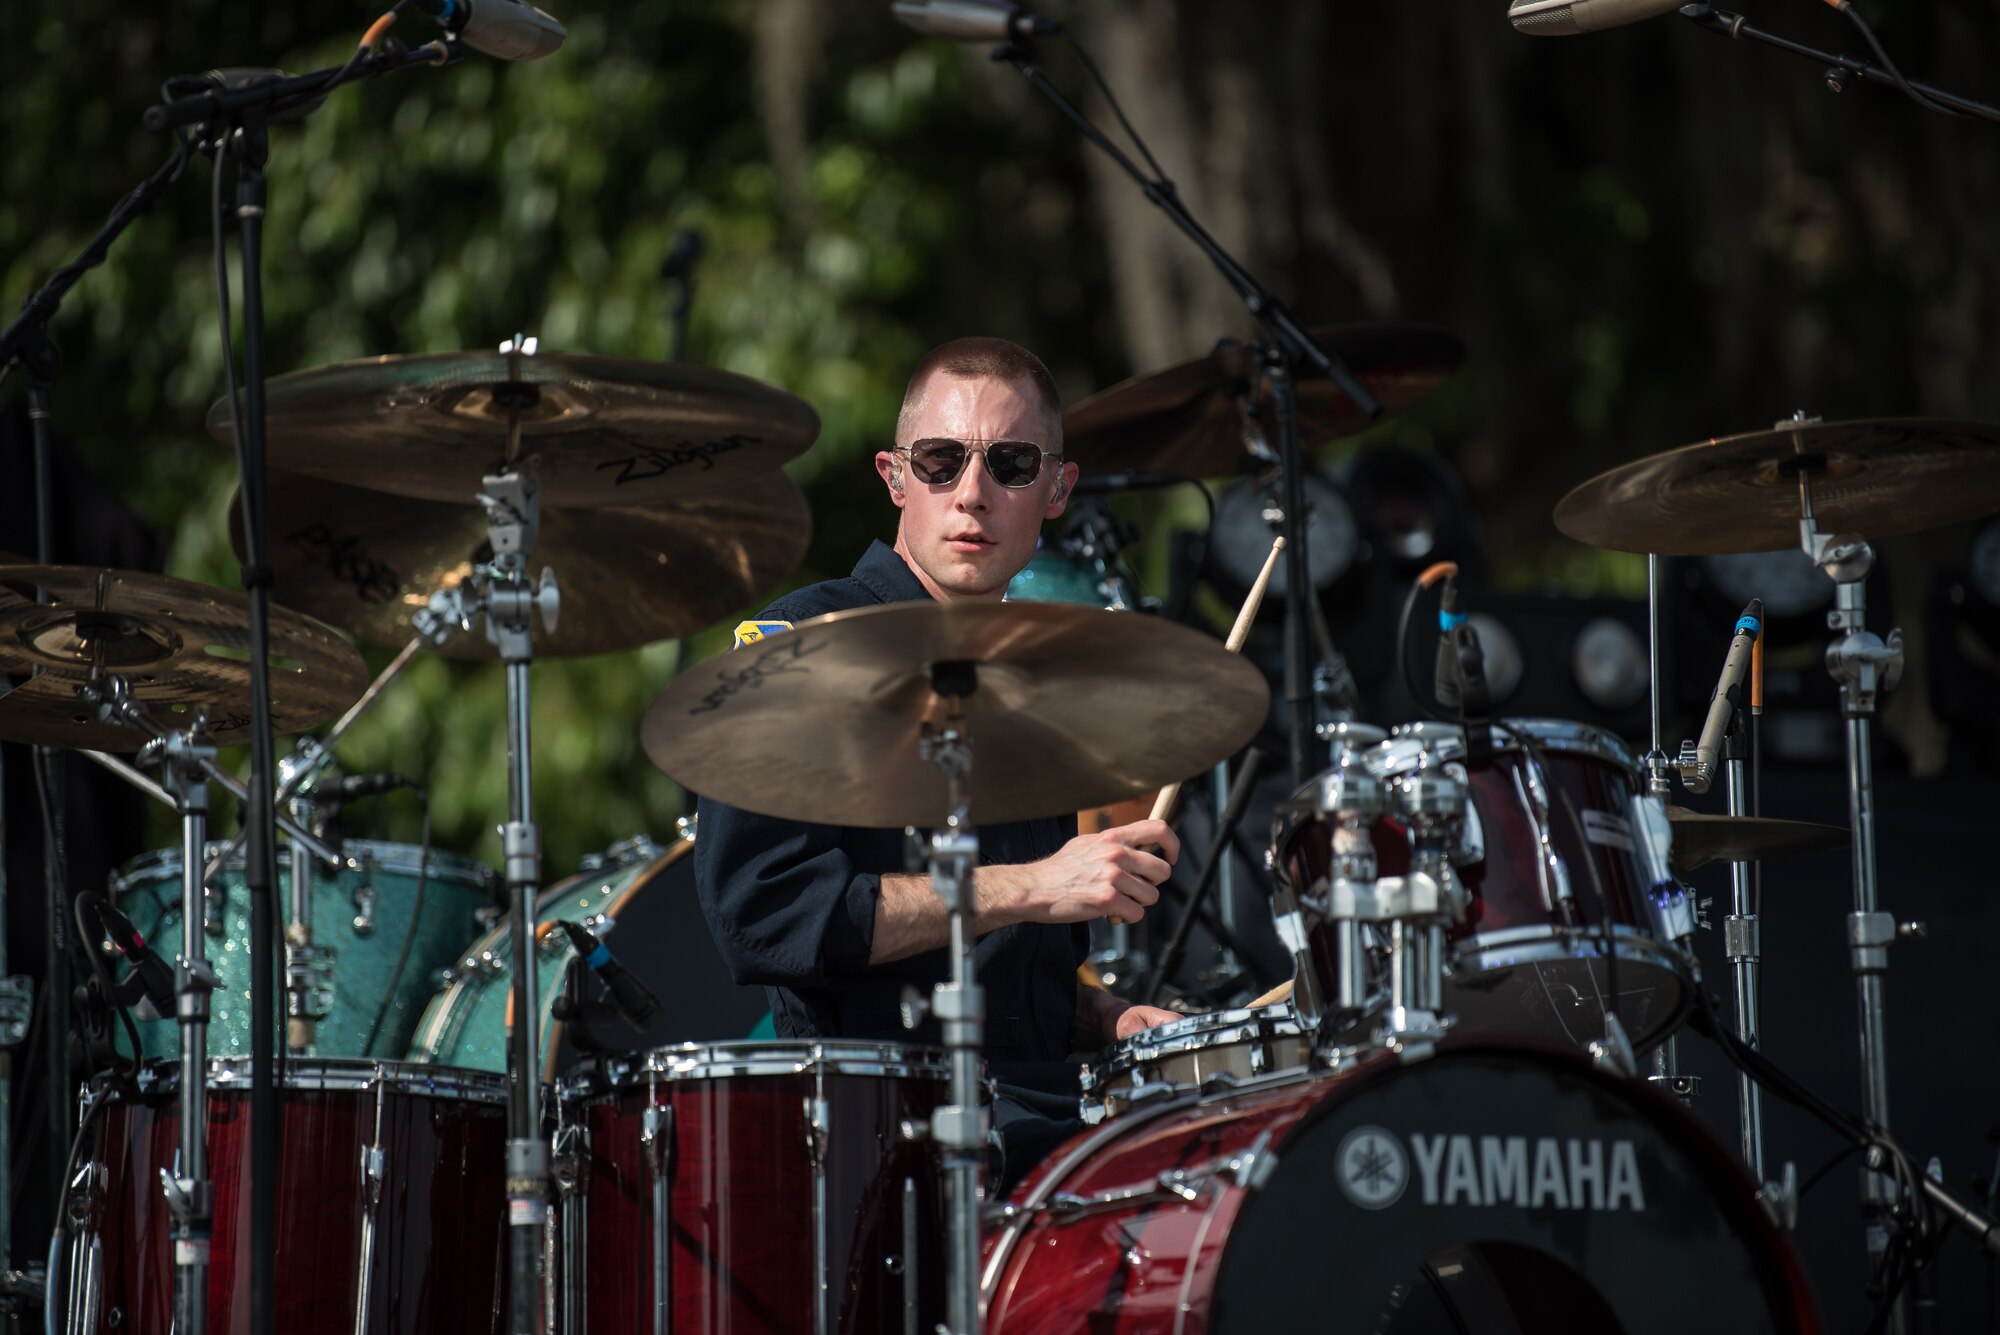 Technical Sgt. Gabriel Staznik, drummer with Max Impact, performs at the Armed Forces Tribute for the 2019 Suwannee River Jam. This event took place at the Spirit of the Suwannee Music Park on Saturday, May 4, 2019. (U.S. Air Force Photo by Chief Master Sgt. Kevin Burns)